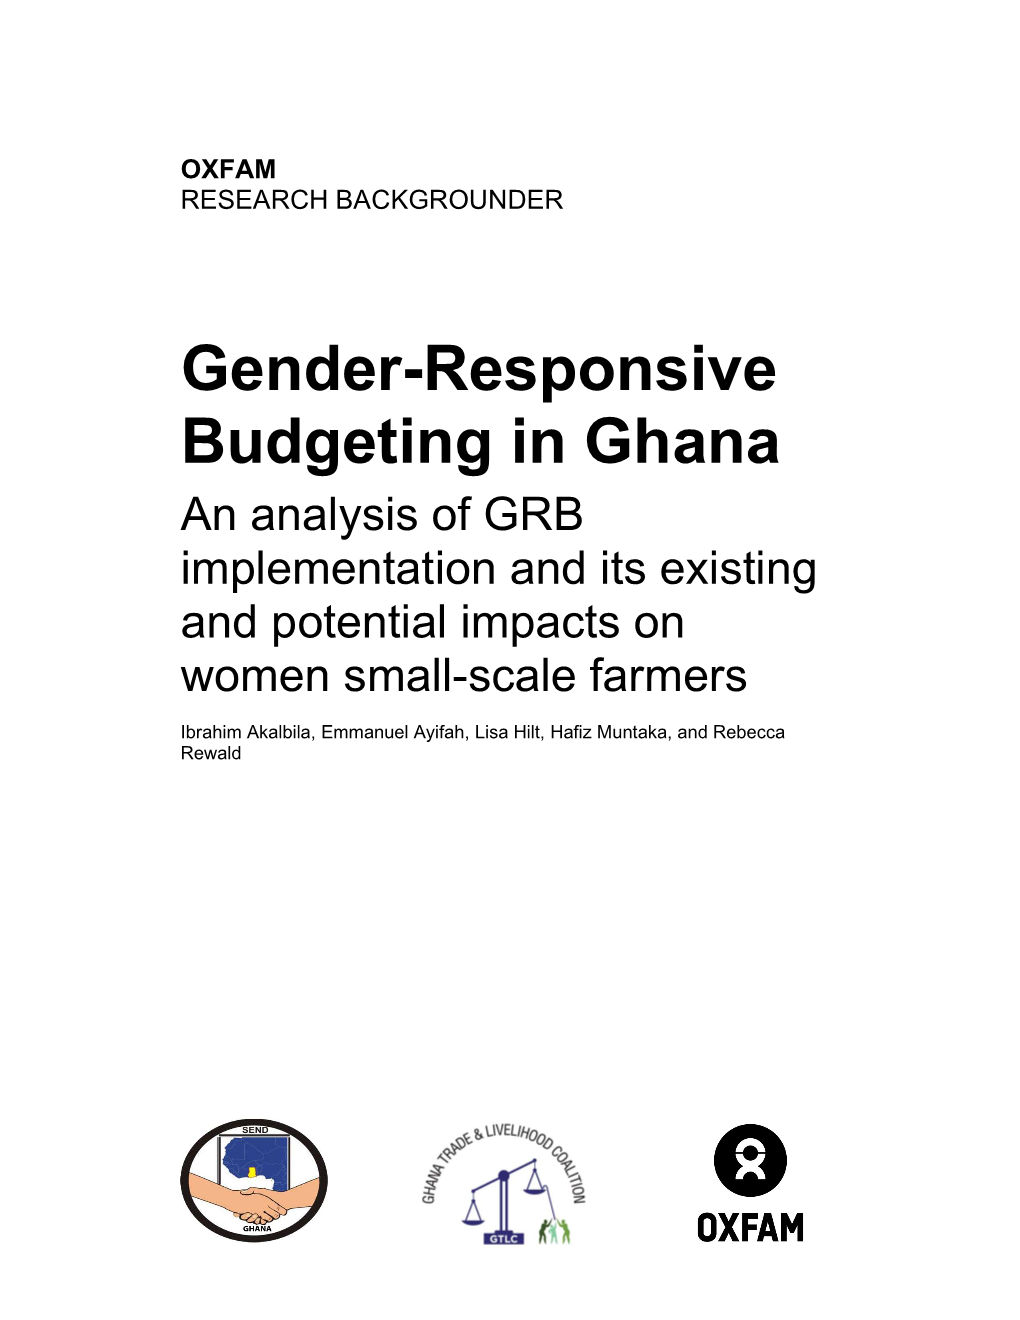 Gender-Responsive Budgeting in Ghana an Analysis of GRB Implementation and Its Existing and Potential Impacts on Women Small-Scale Farmers